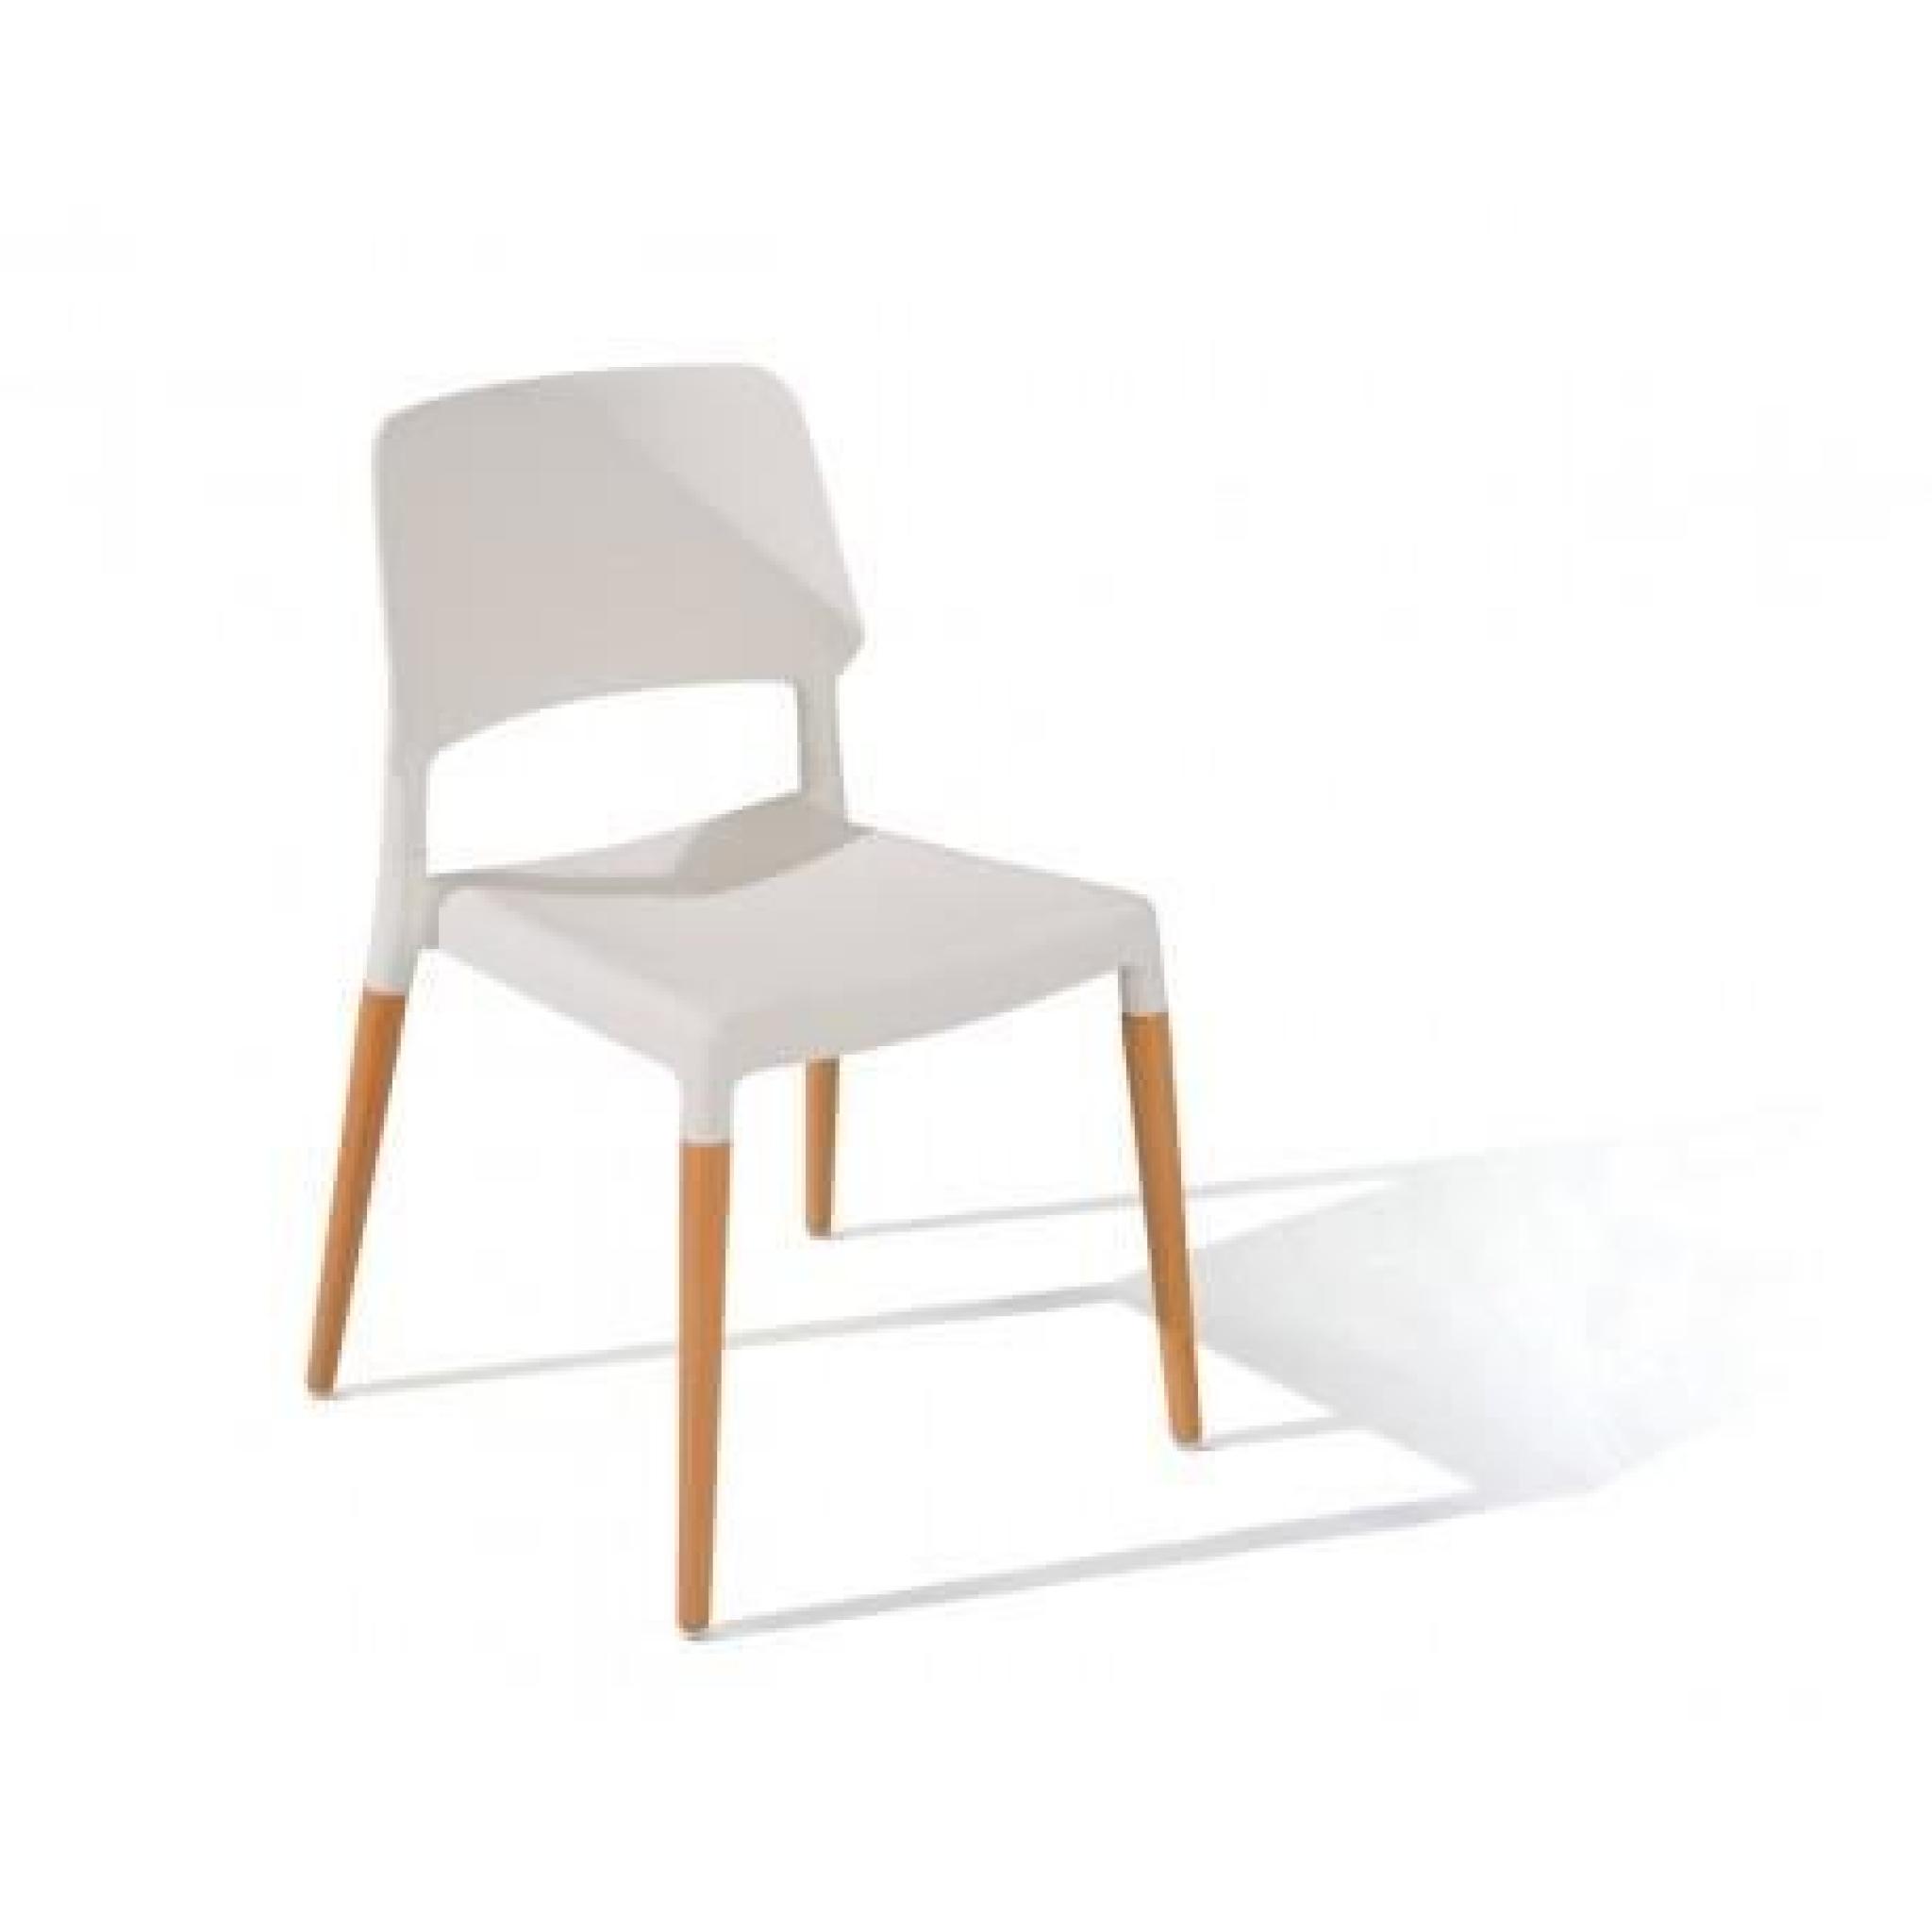 Mélanie - Lot 4 Chaises Blanches